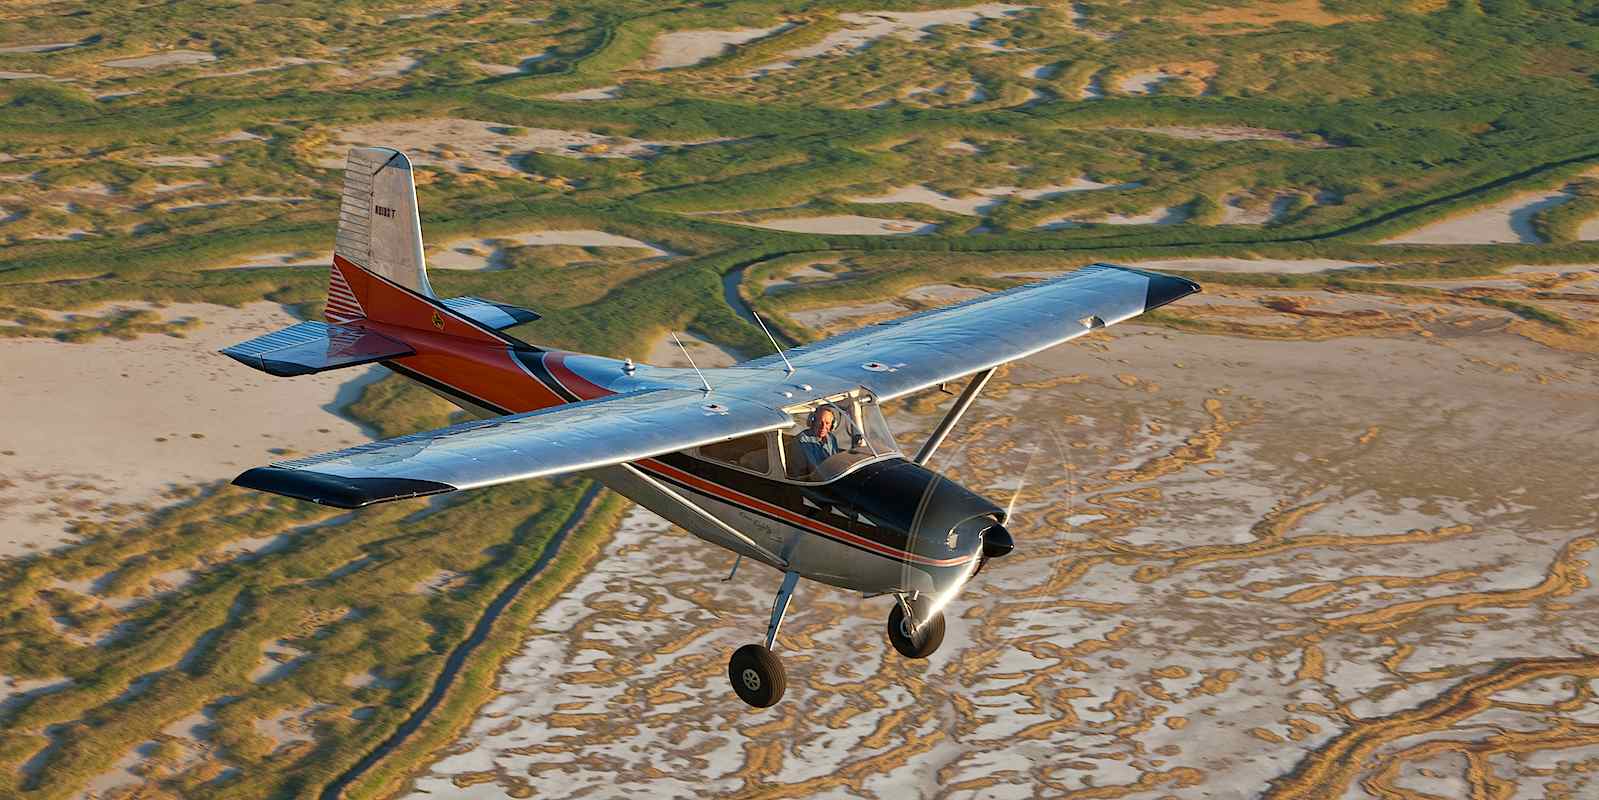 Mel Rozma flying his Cessna 180, part of his aviation dream.